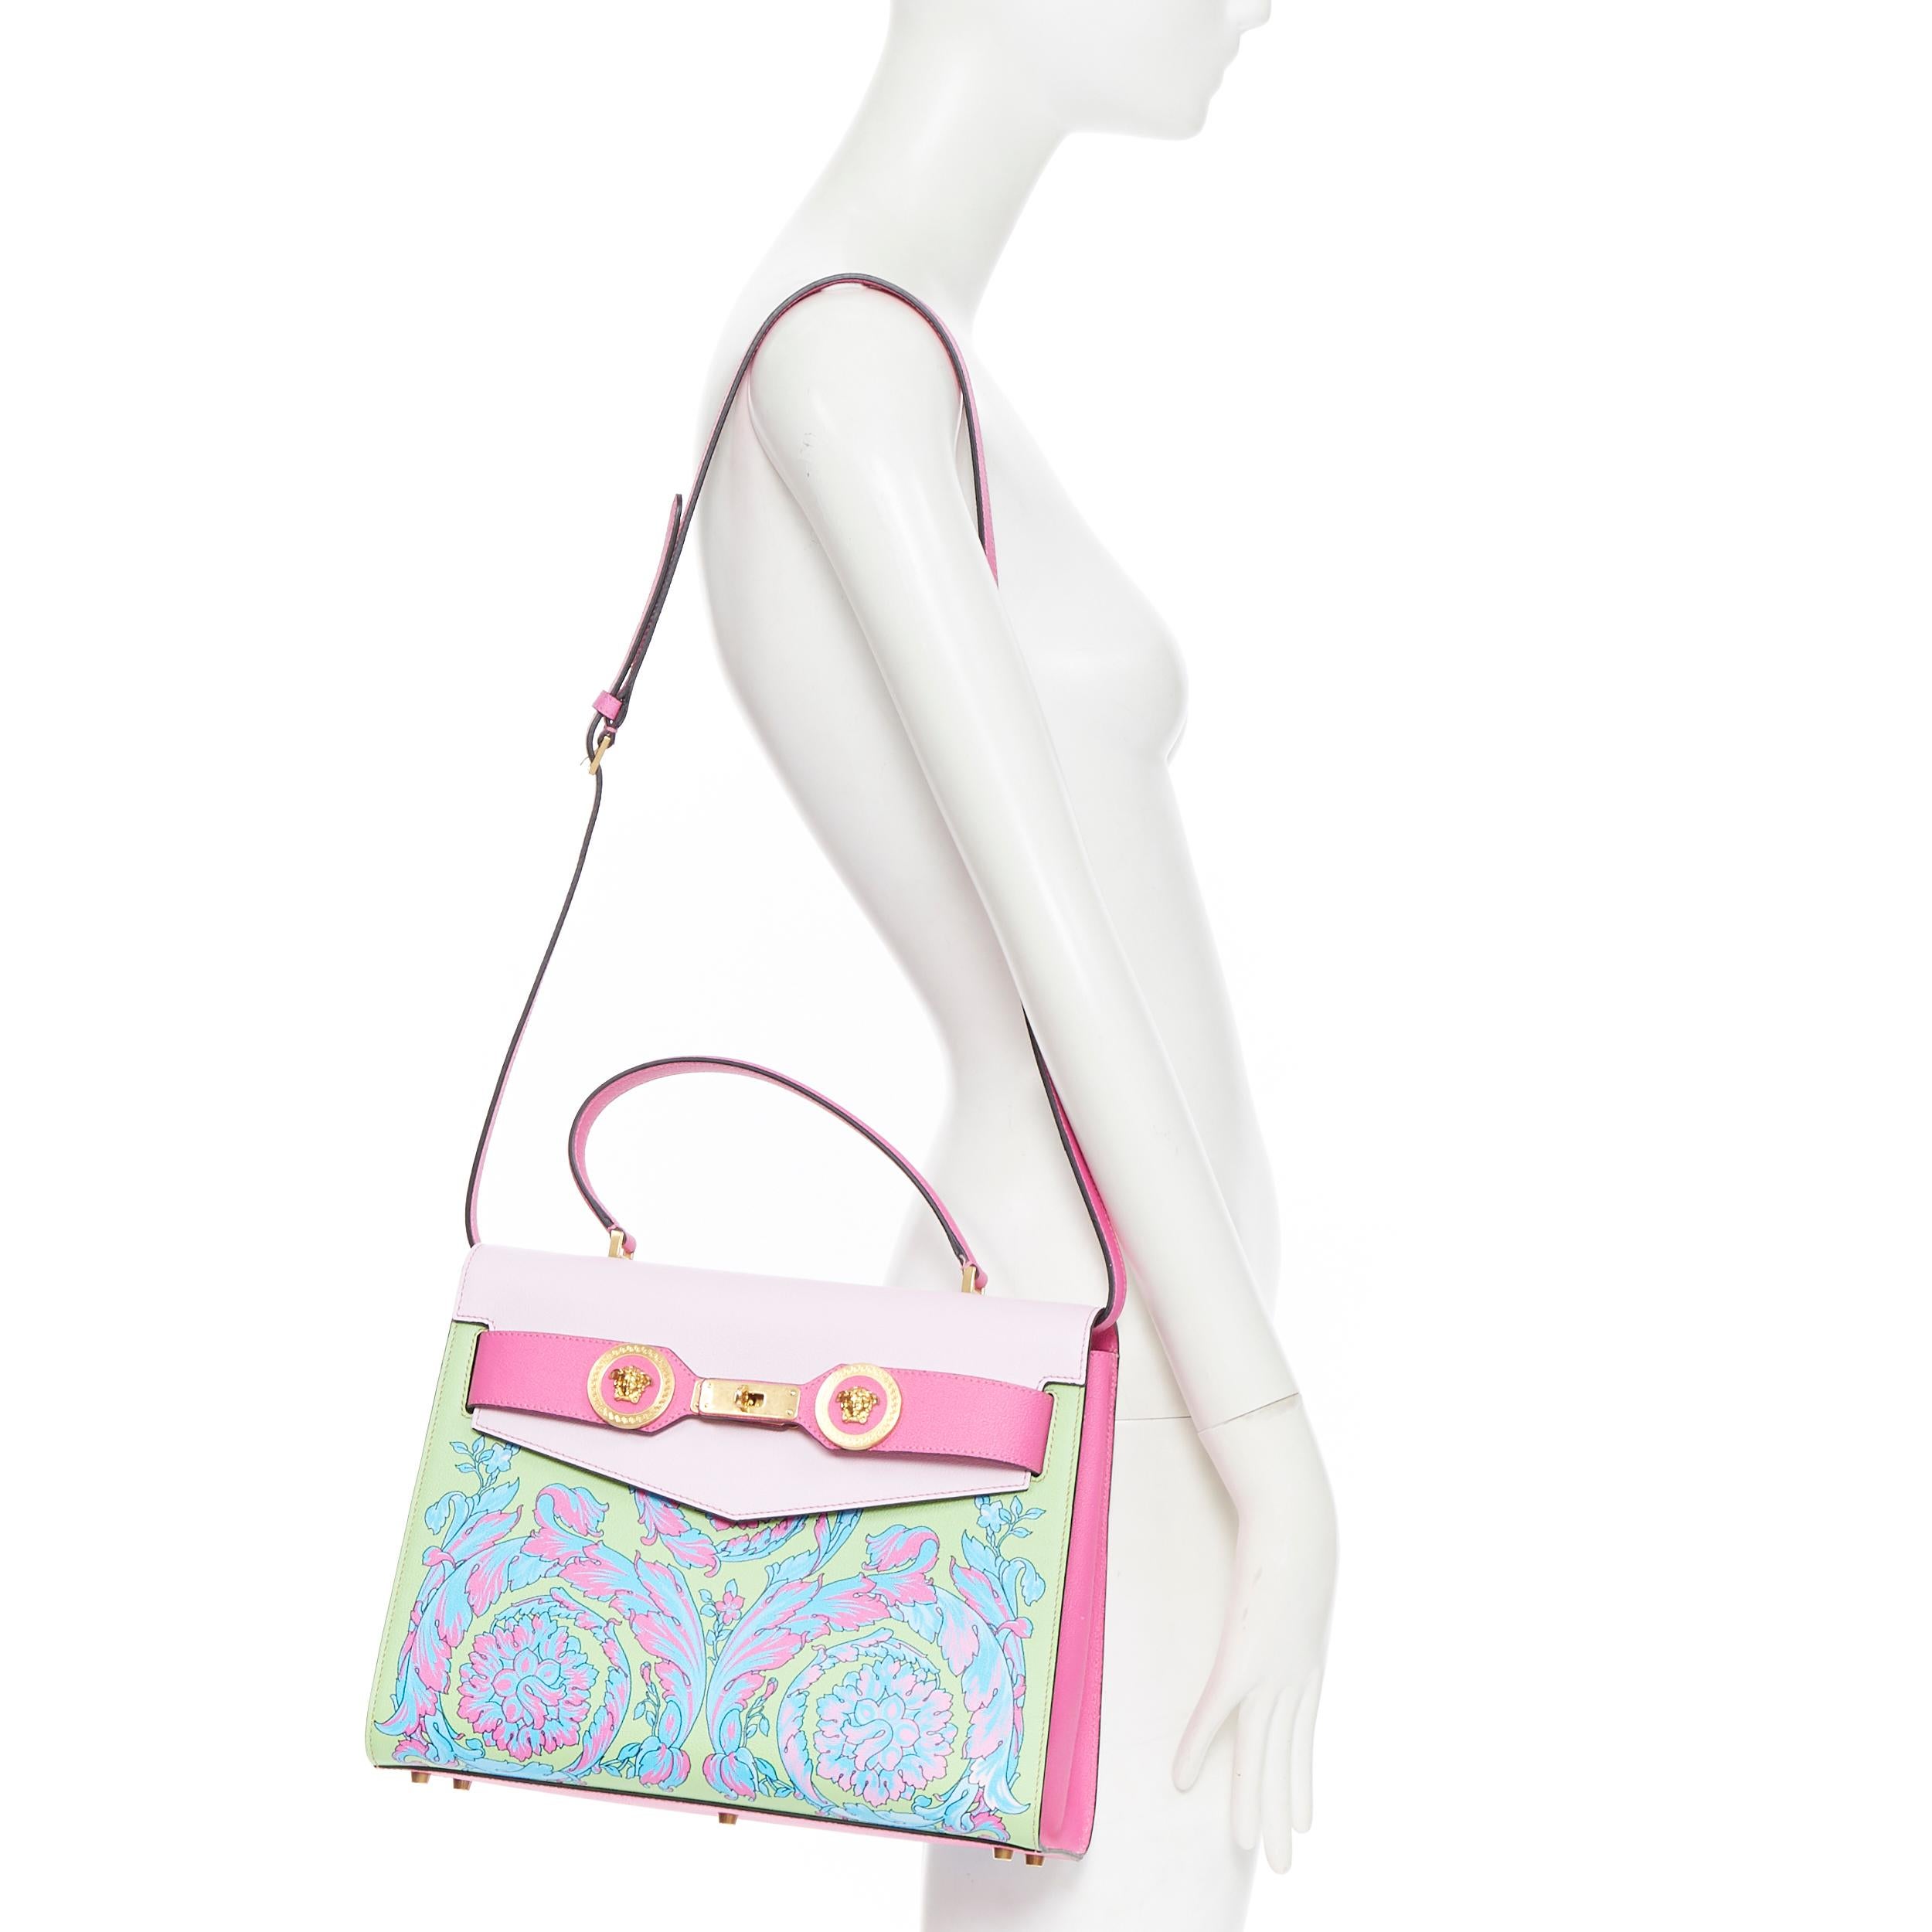 new VERSACE Diana Tribute Technicolor Baroque print top handle Kelly satchel bag
Brand: Versace
Designer: Donatella Versace
Collection: 2019
Model Name / Style: Tribute Diana
Material: Leather
Color: Pink
Pattern: Floral
Closure: Turnlock
Lining